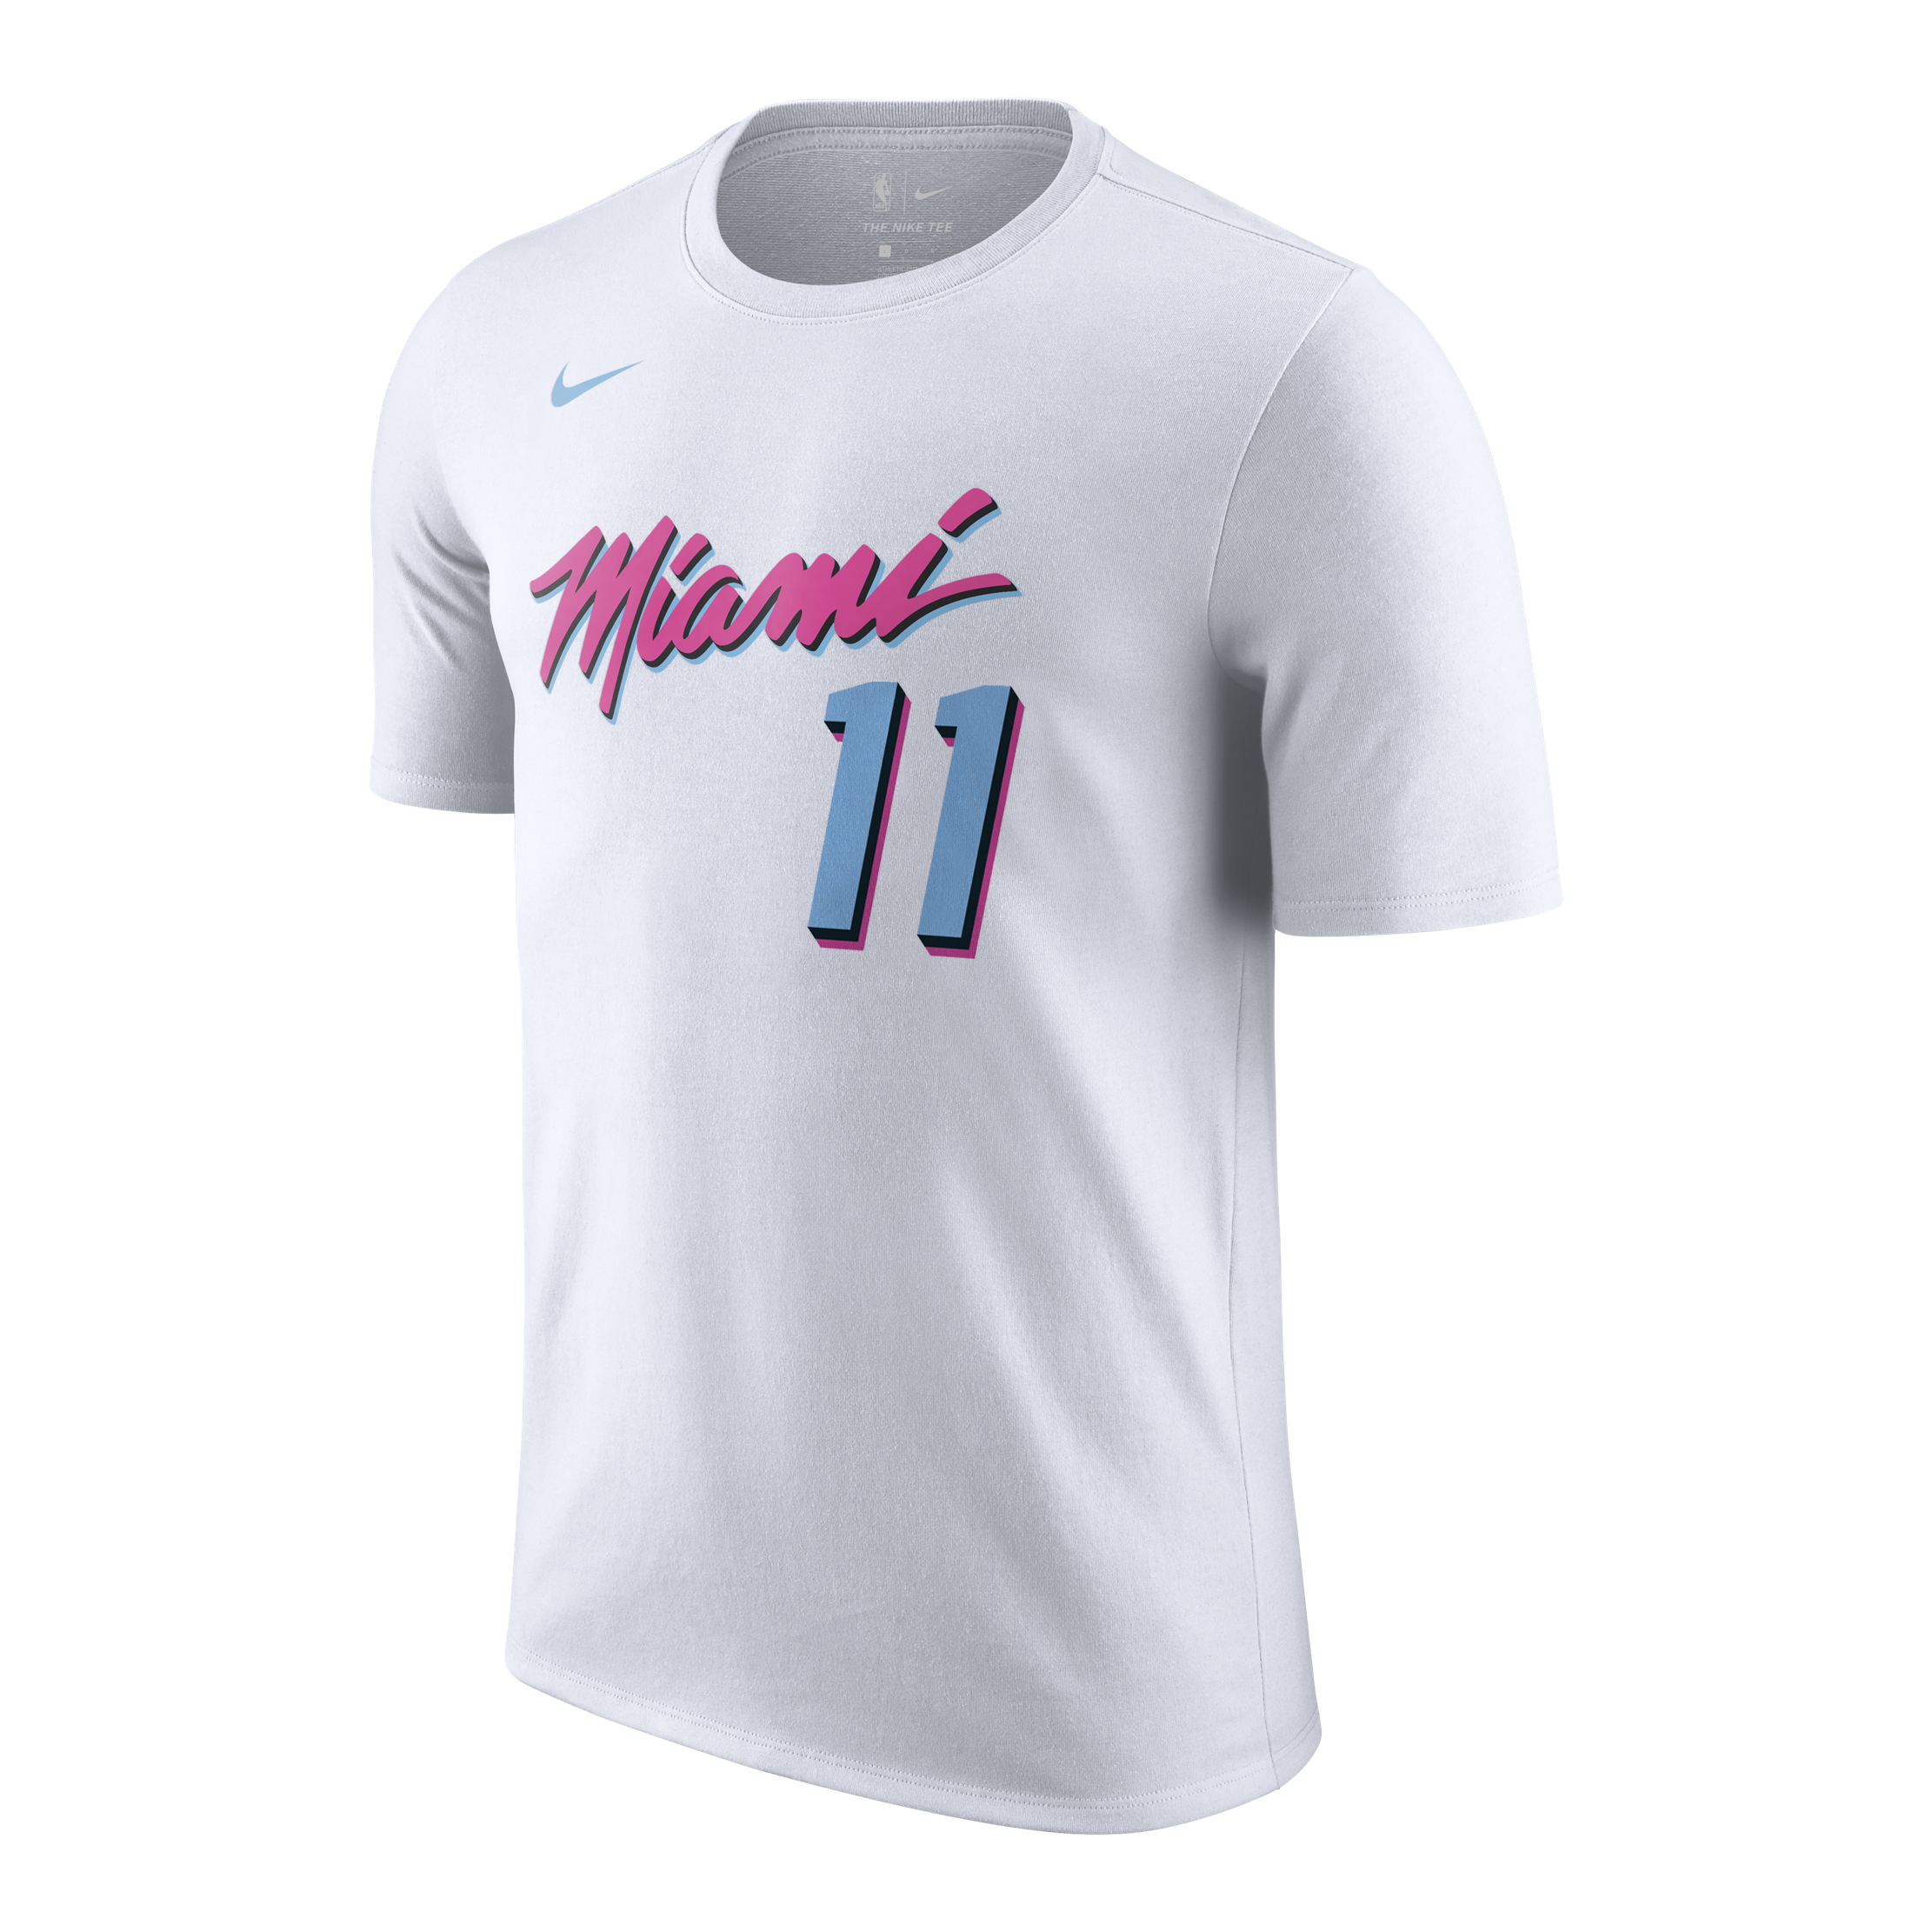 dion waiters miami vice jersey